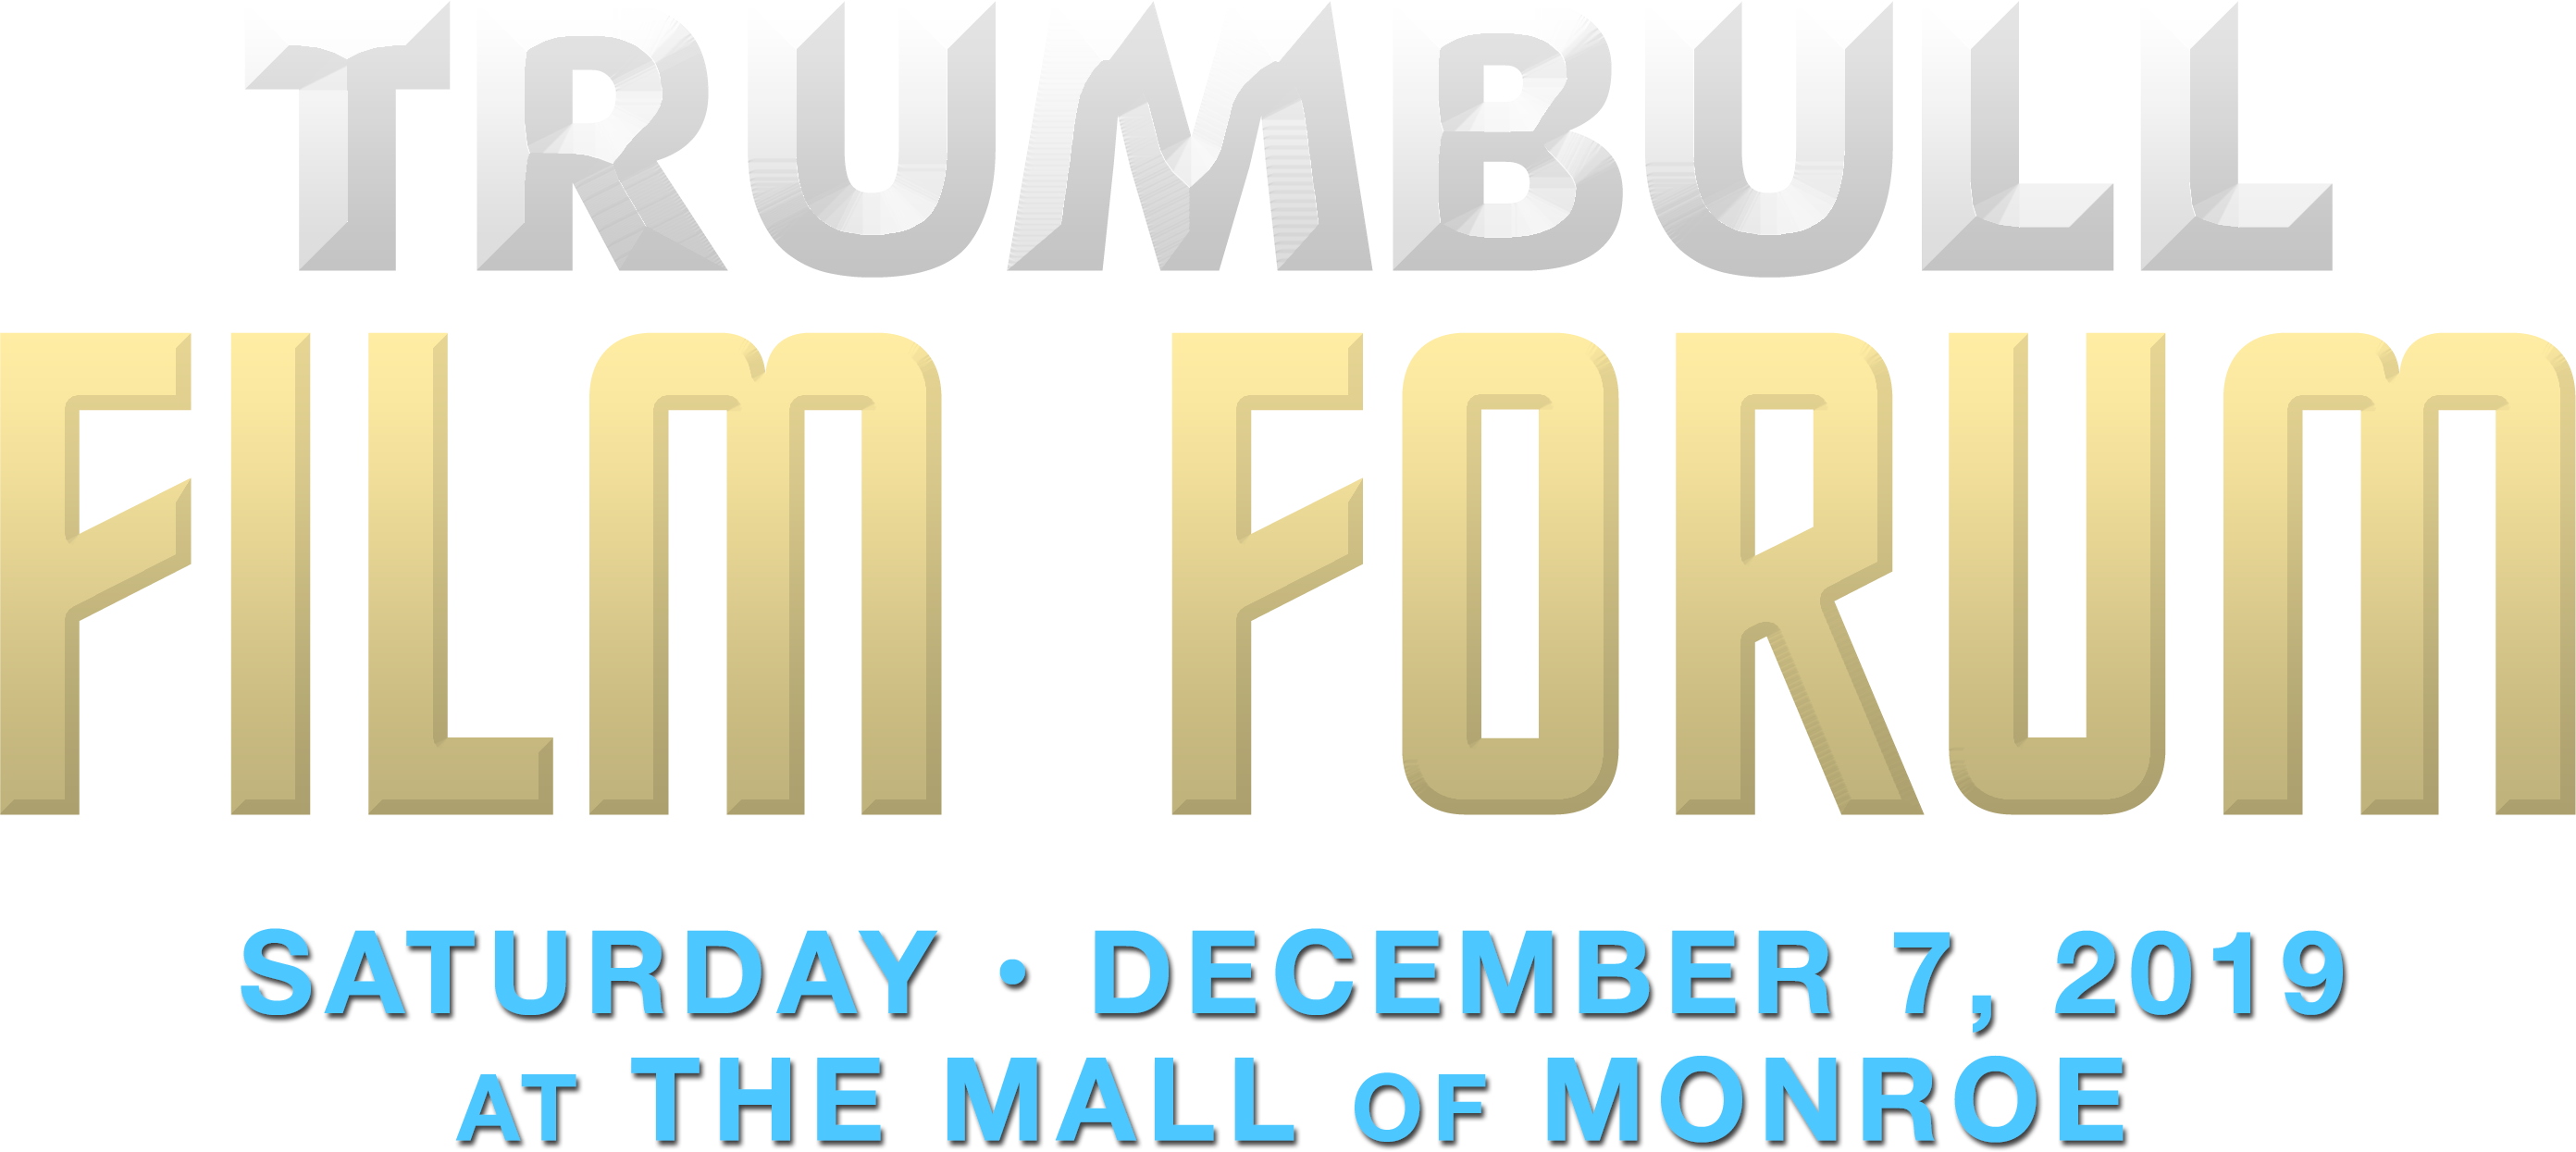 The Trumbull Film Forum Saturday, December 7, 2019 at Phoenix Theatres The Mall of Monroe